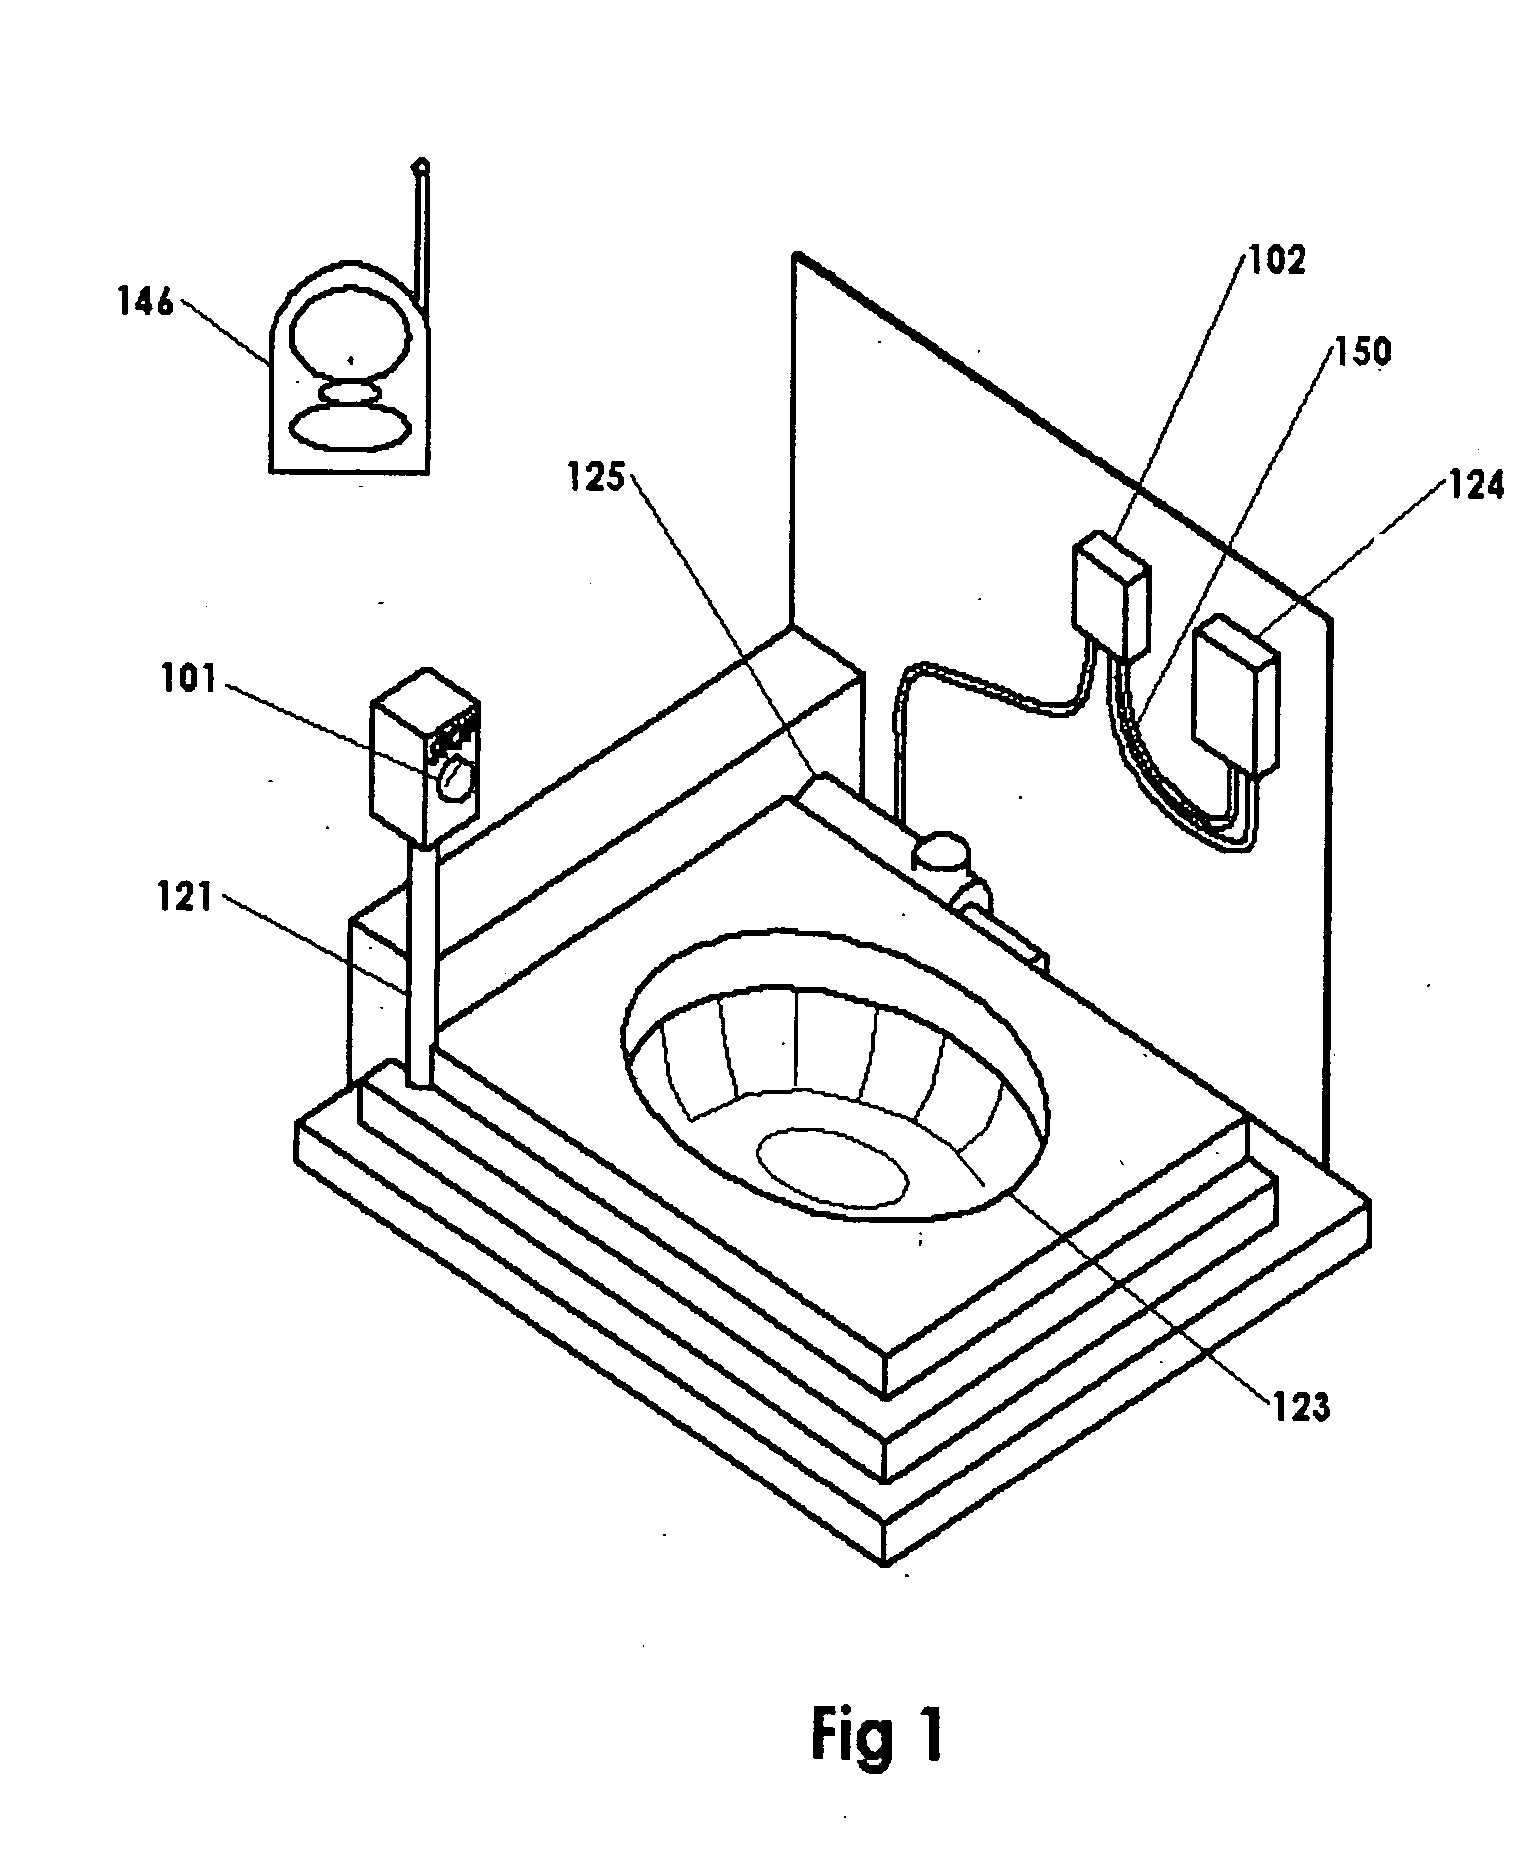 Enhanced safety stop device for pools and spas